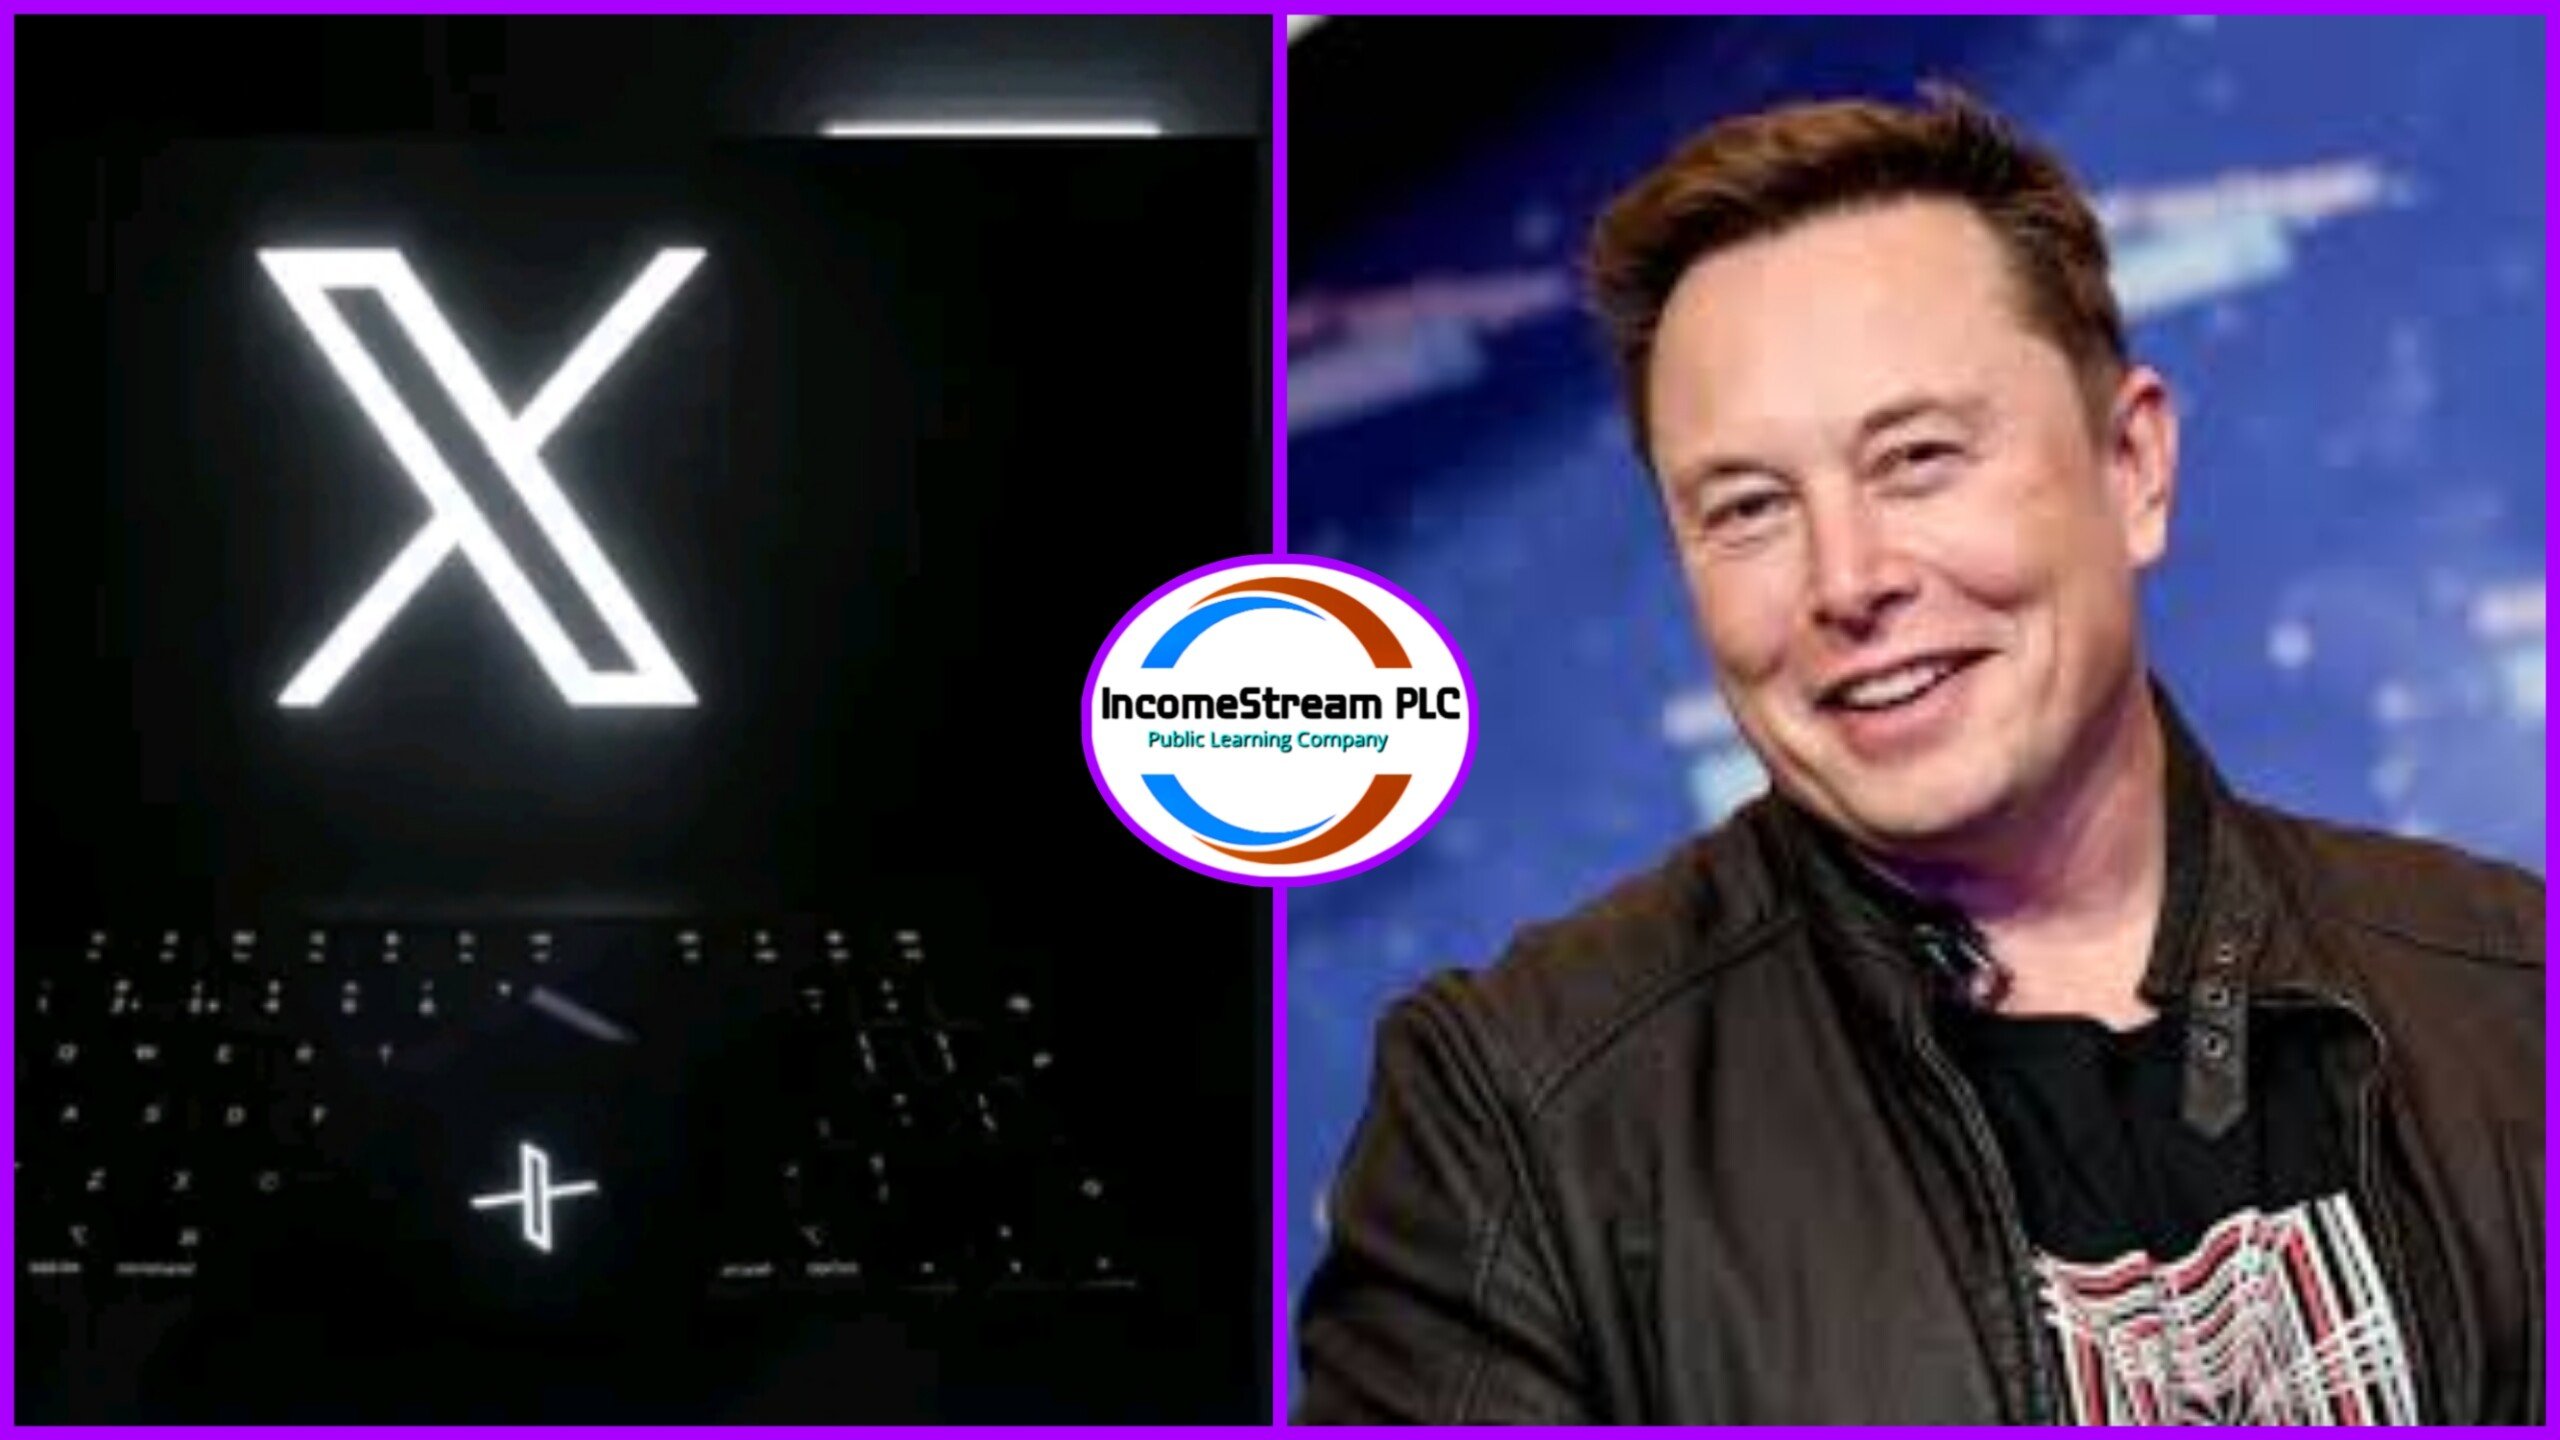 X formally Twitter will charge a $1 annual subscription fee to new, unverified users – Elon Musk